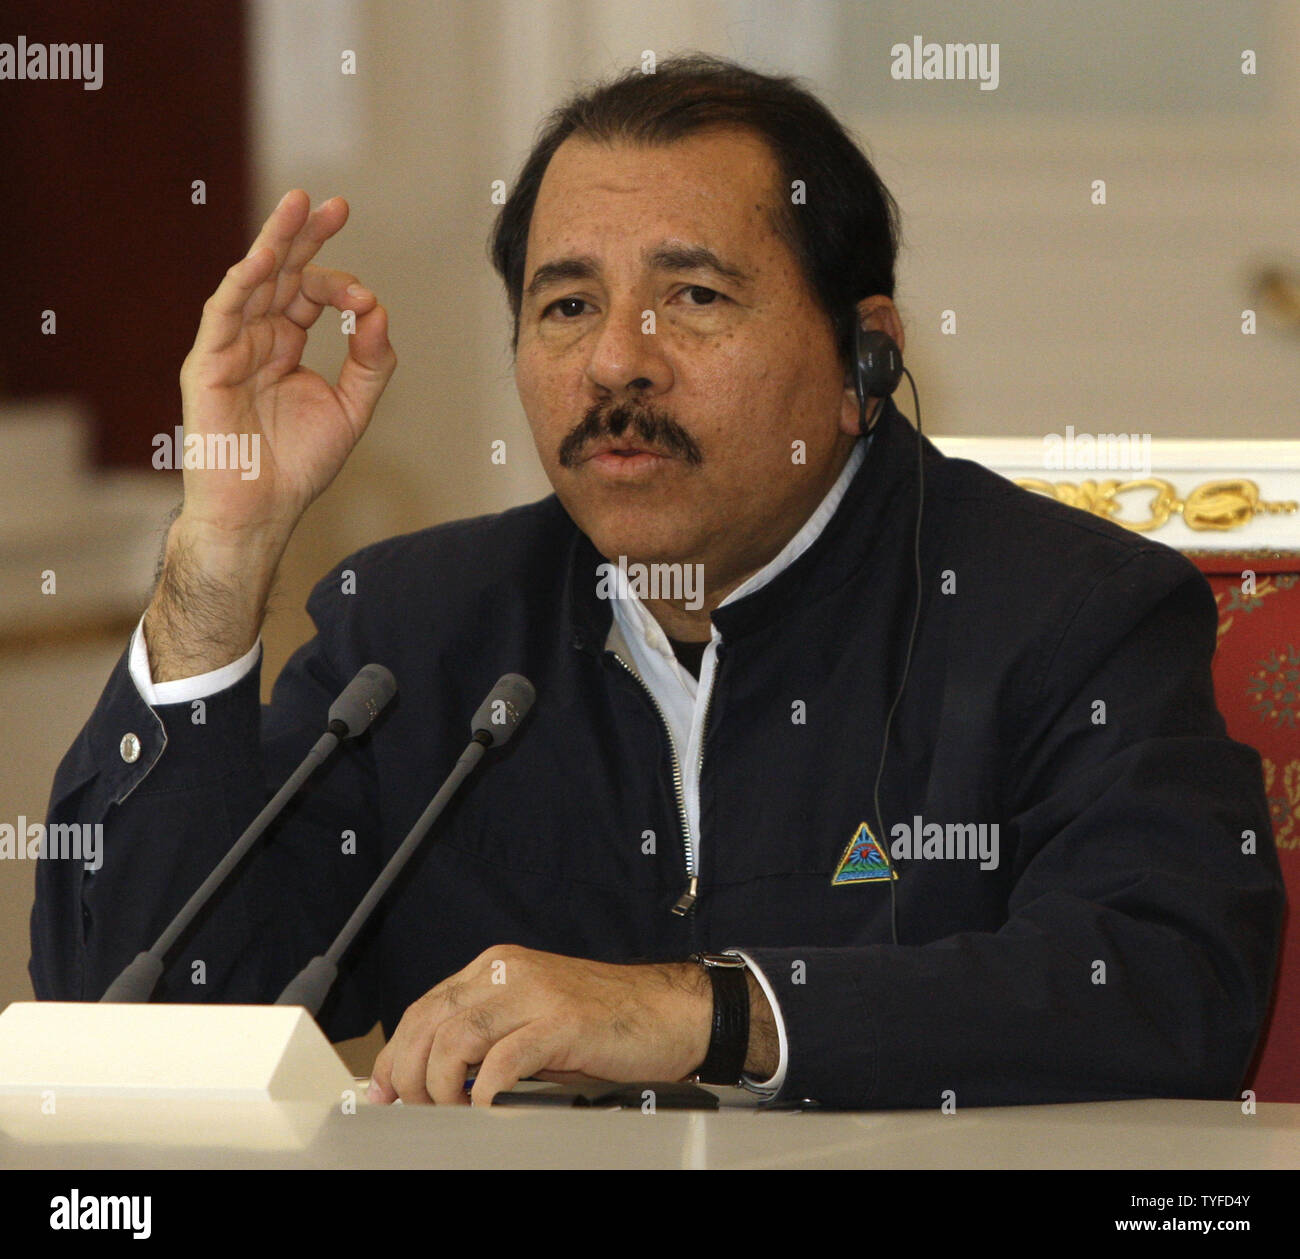 Nicaraguan President Daniel Ortega speaks during a meeting with Russian President Dmitry Medvedev in the Kremlin in Moscow on December 18, 2008. Nicaragua was a close ally of Moscow in the 1980s under Daniel Ortega, a leftist who returned to power in 2006. (UPI Photo/Anatoli Zhdanov) Stock Photo